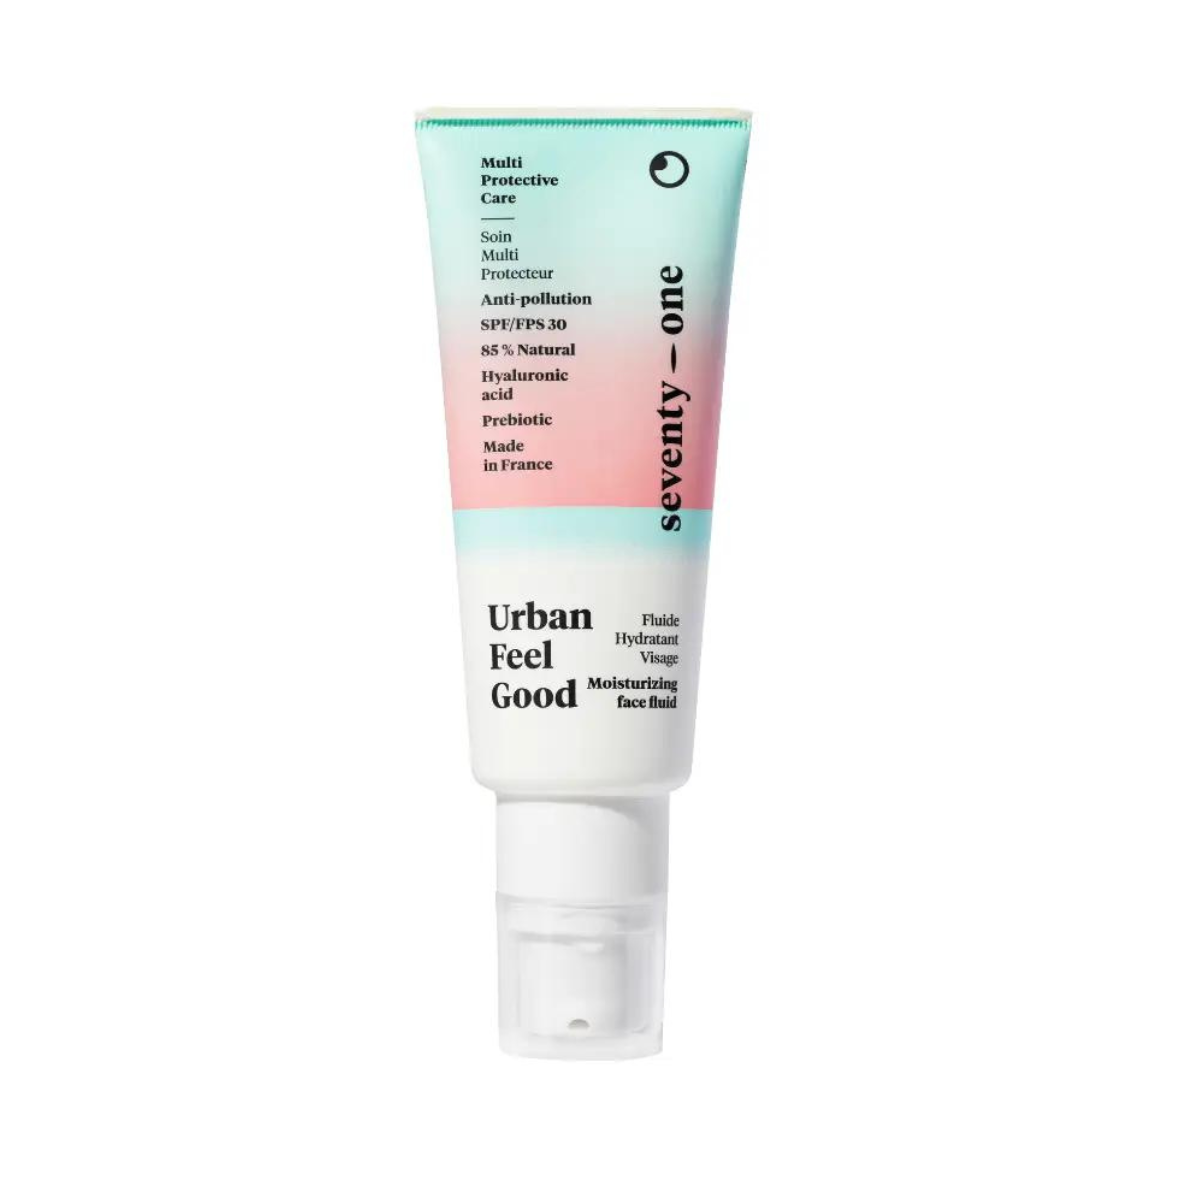 All In One Face Fluid SPF30 - Posie